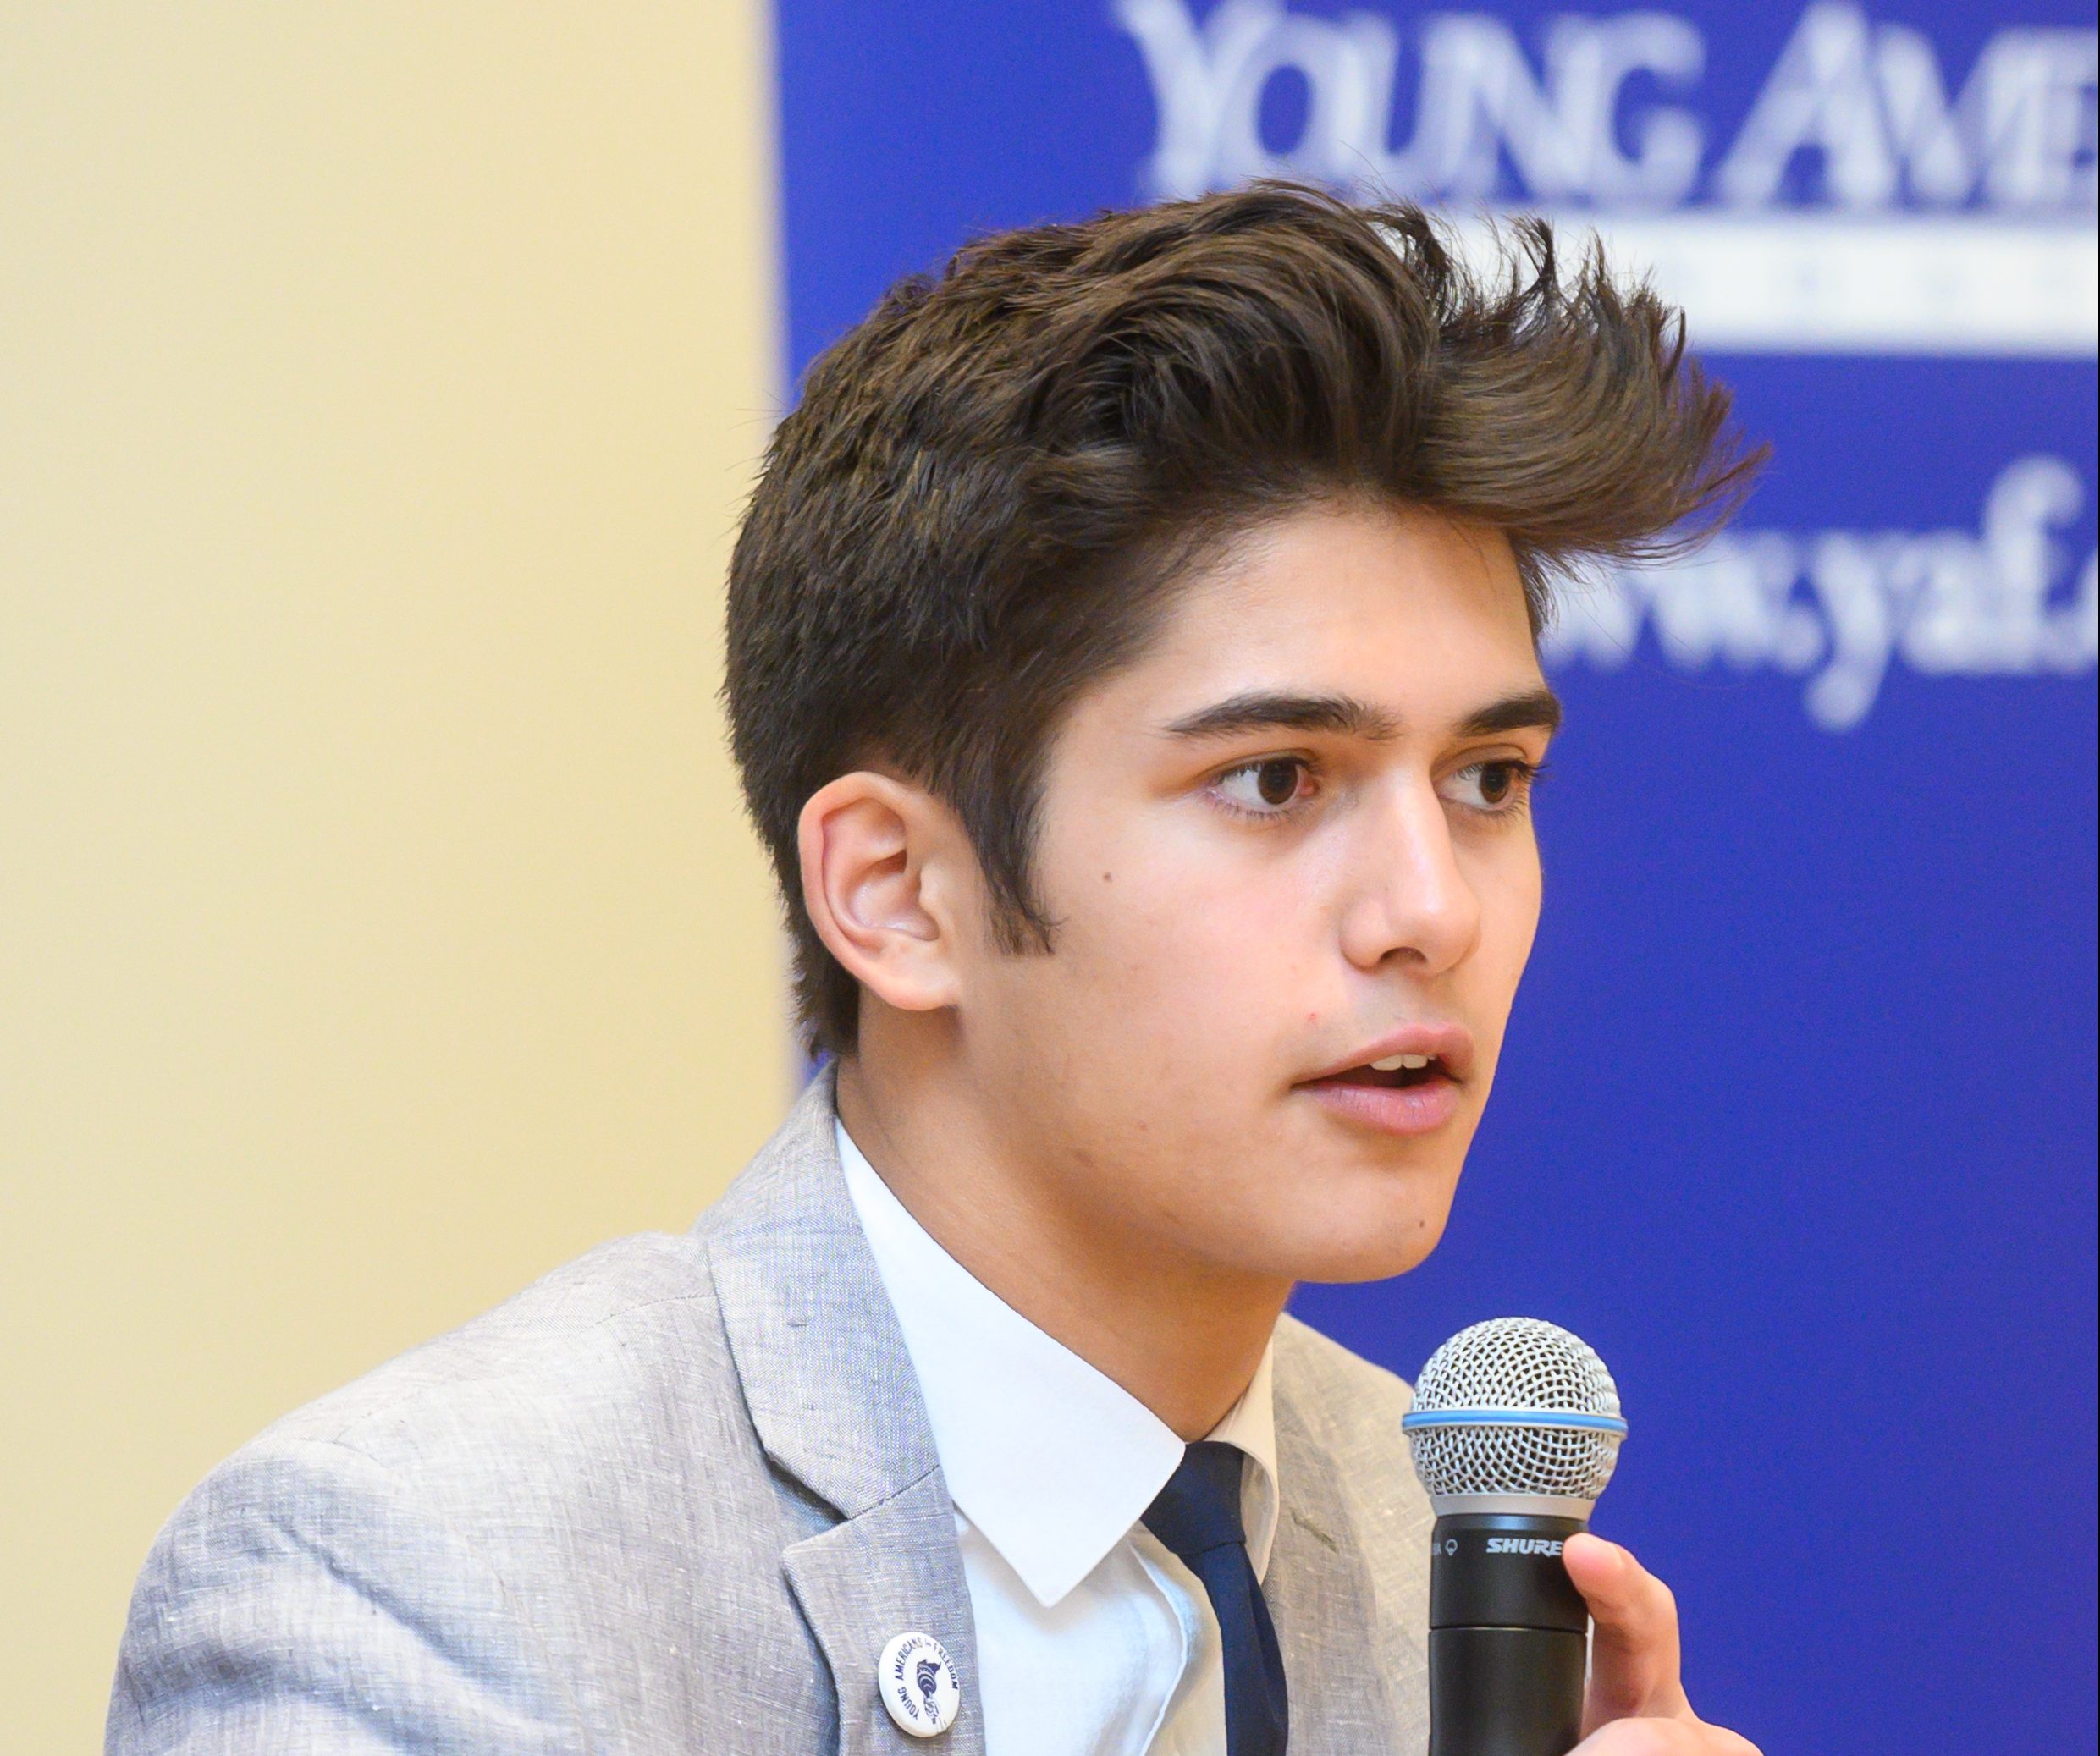 Xavier Jack Duffy - National High School Chairman Of Young Americans For Freedom